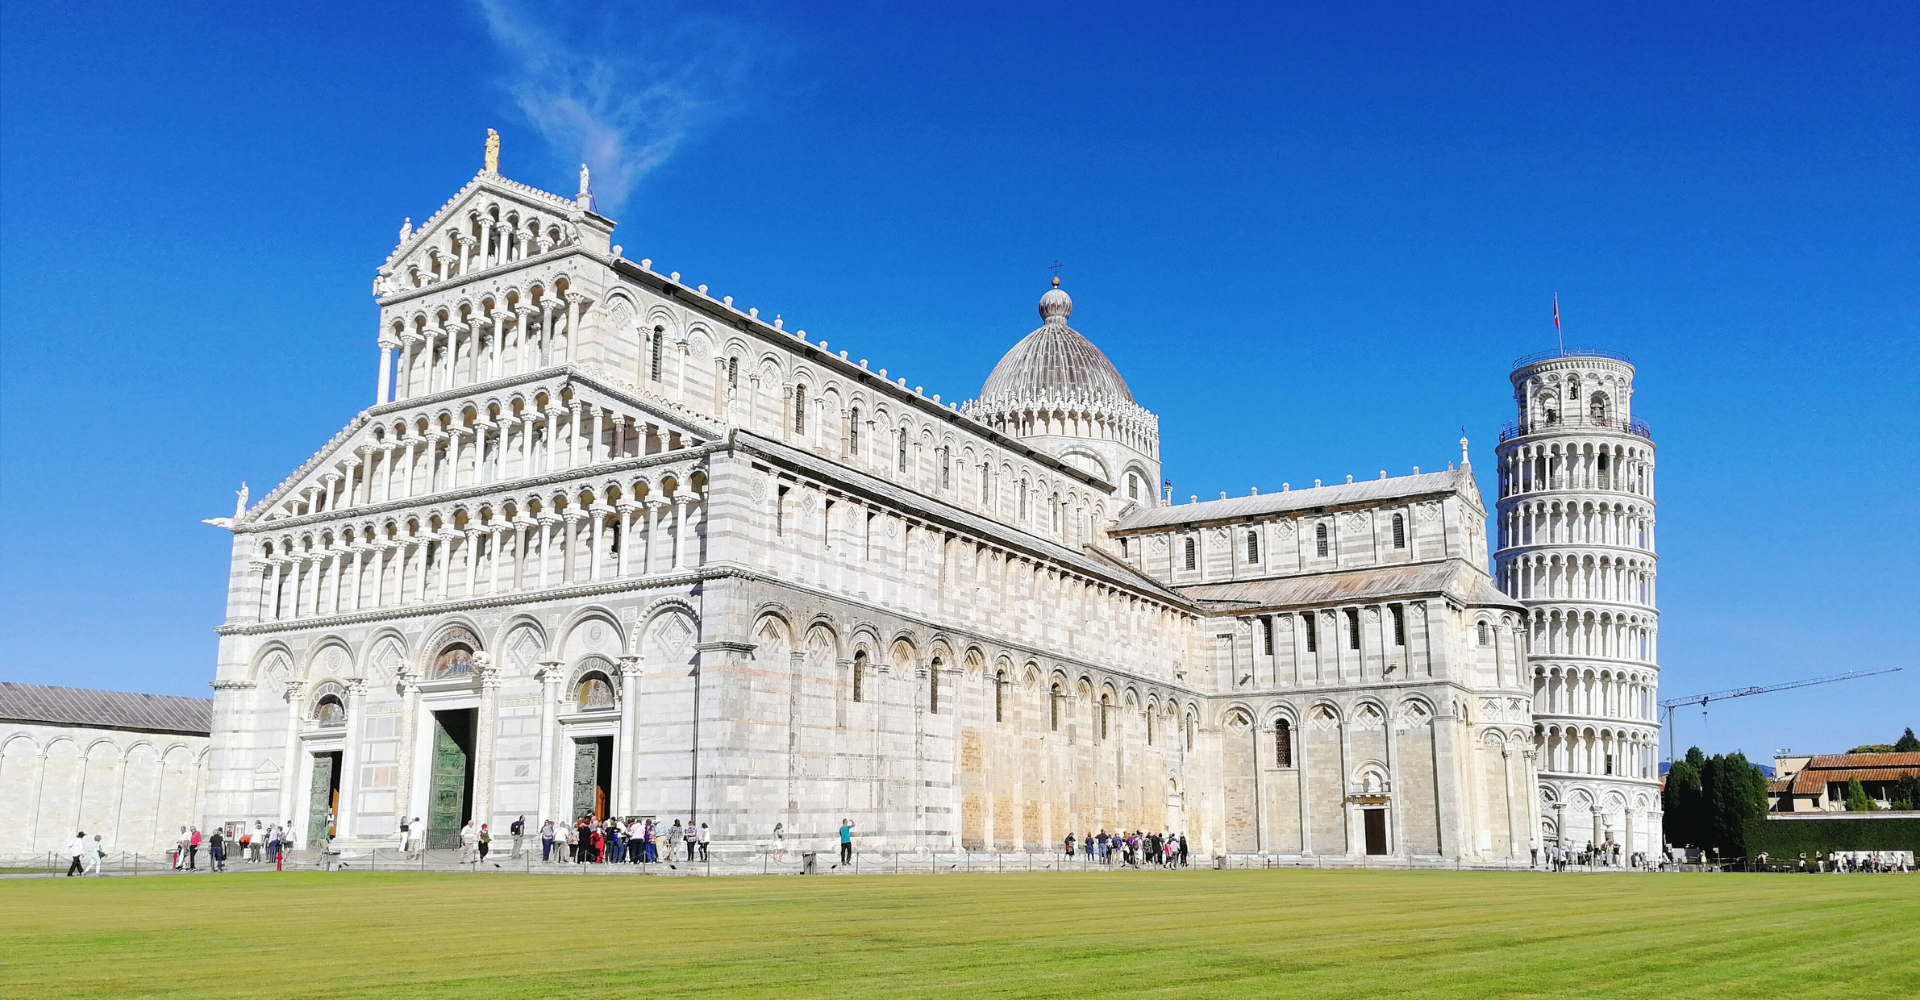 Five days on your bike to discover Pisa, Lucca, Vinci and Florence